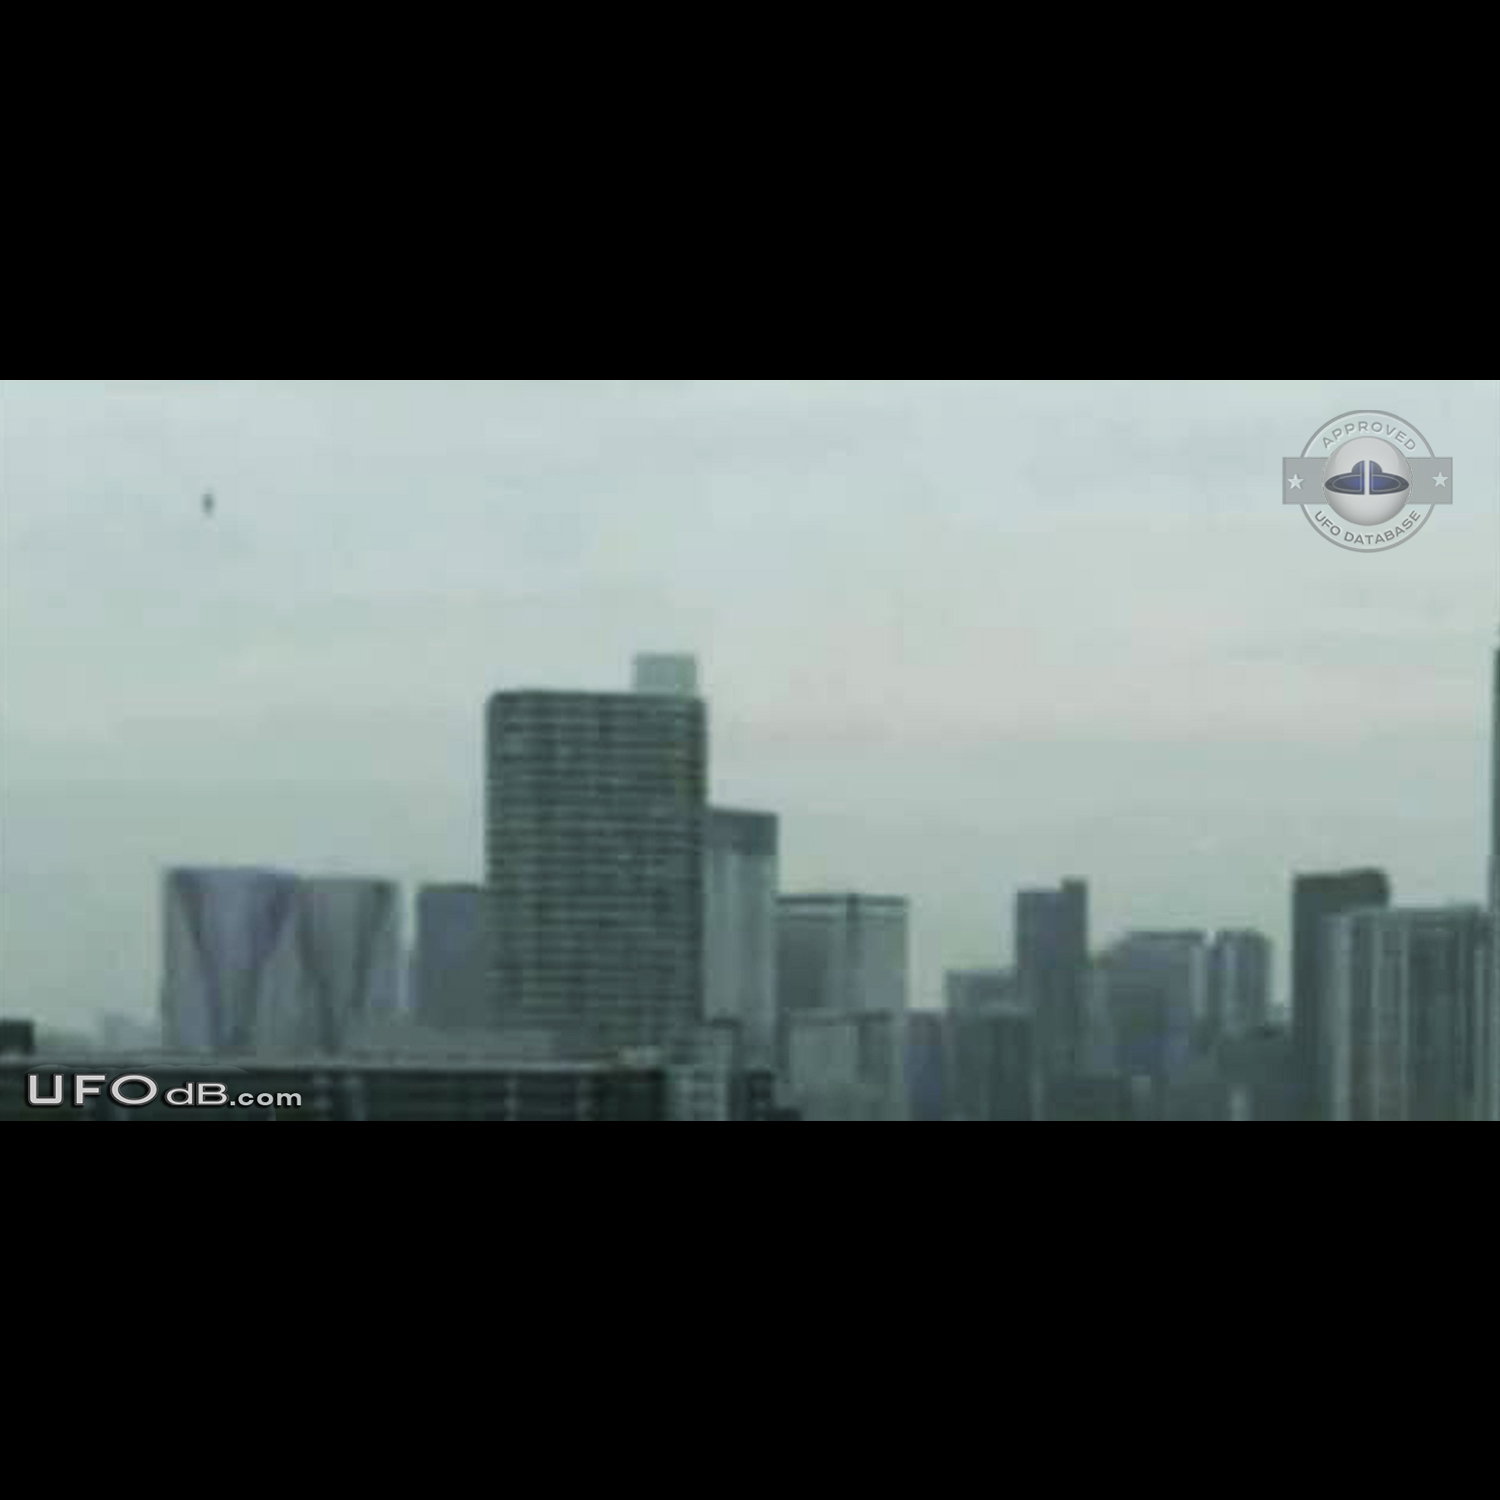 Probe ufo sighting caught on picture in Tokyo, Japan - January 2012 UFO Picture #410-1